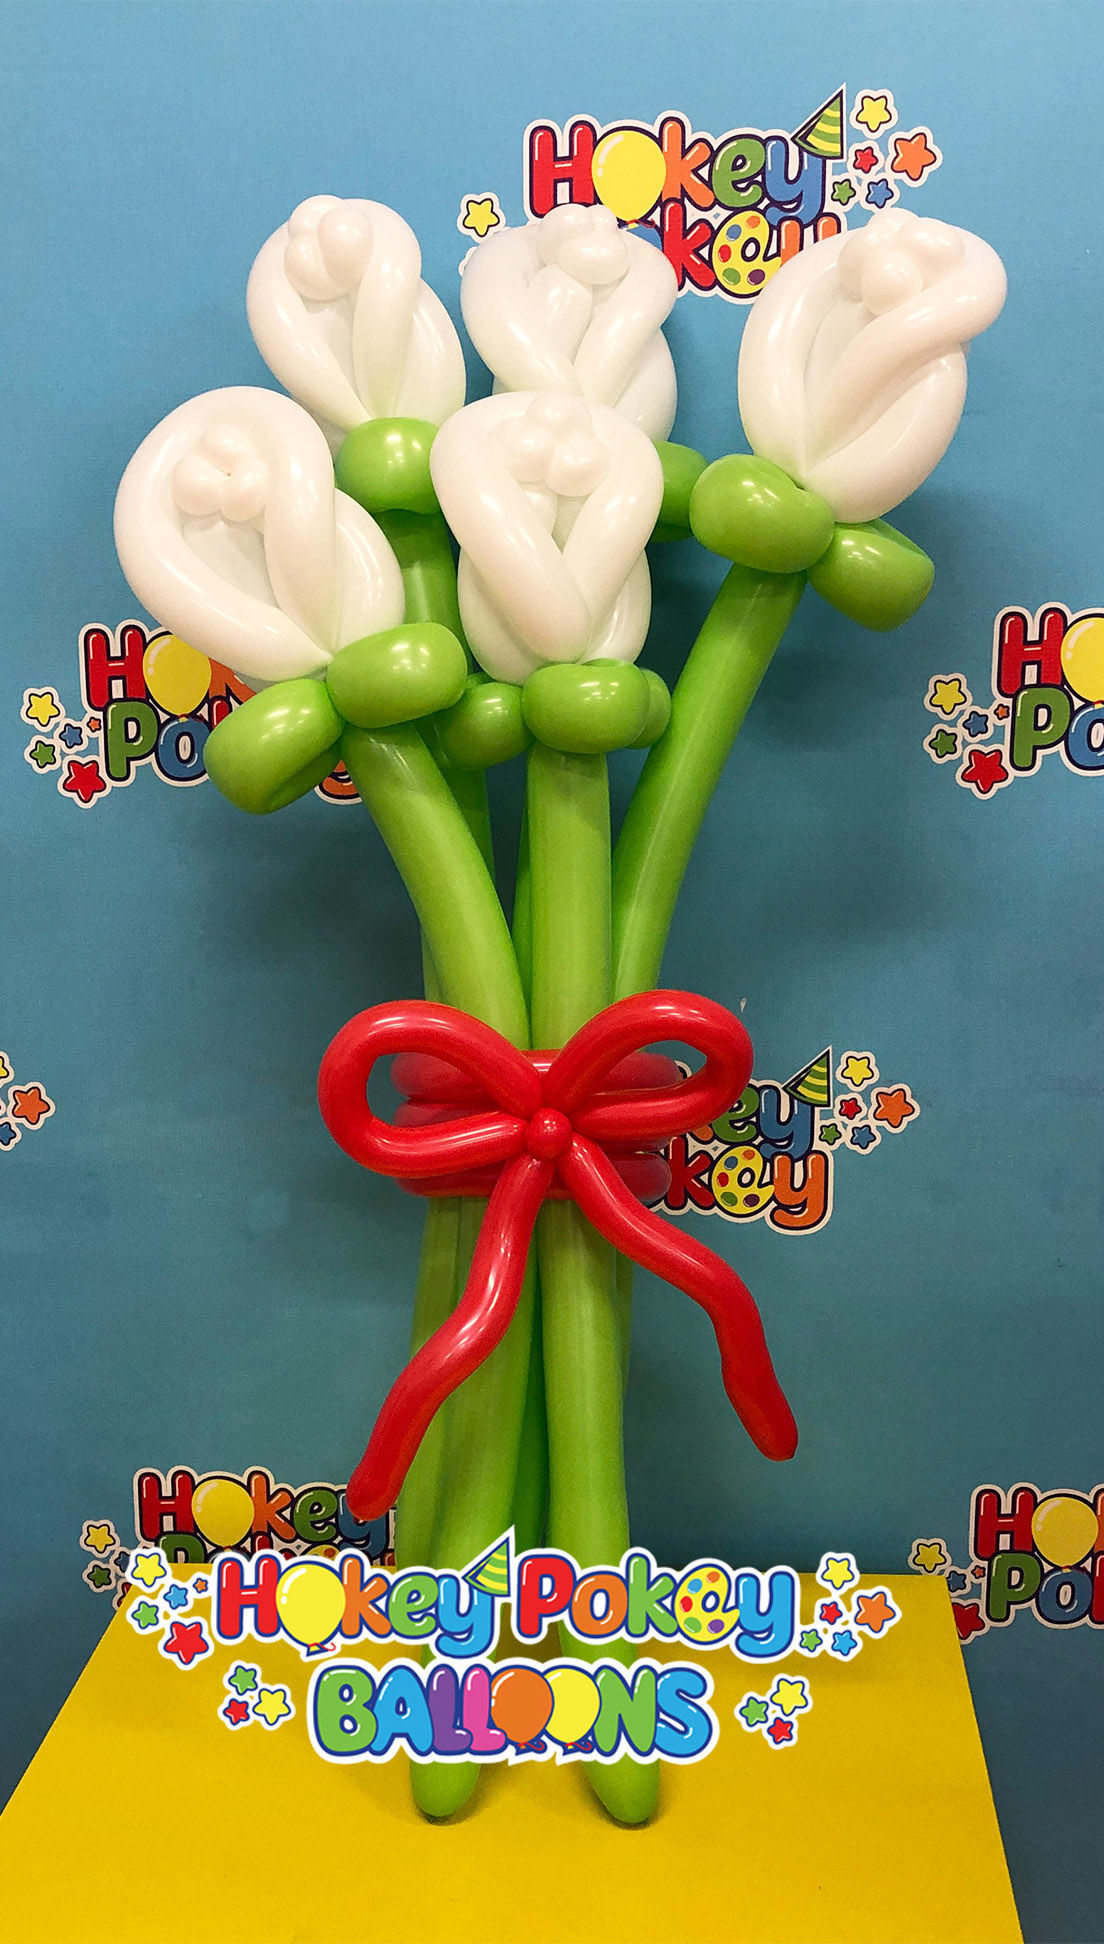 Picture of Rose Buds Balloon Bouquet with Bow (up to 21 flowers)